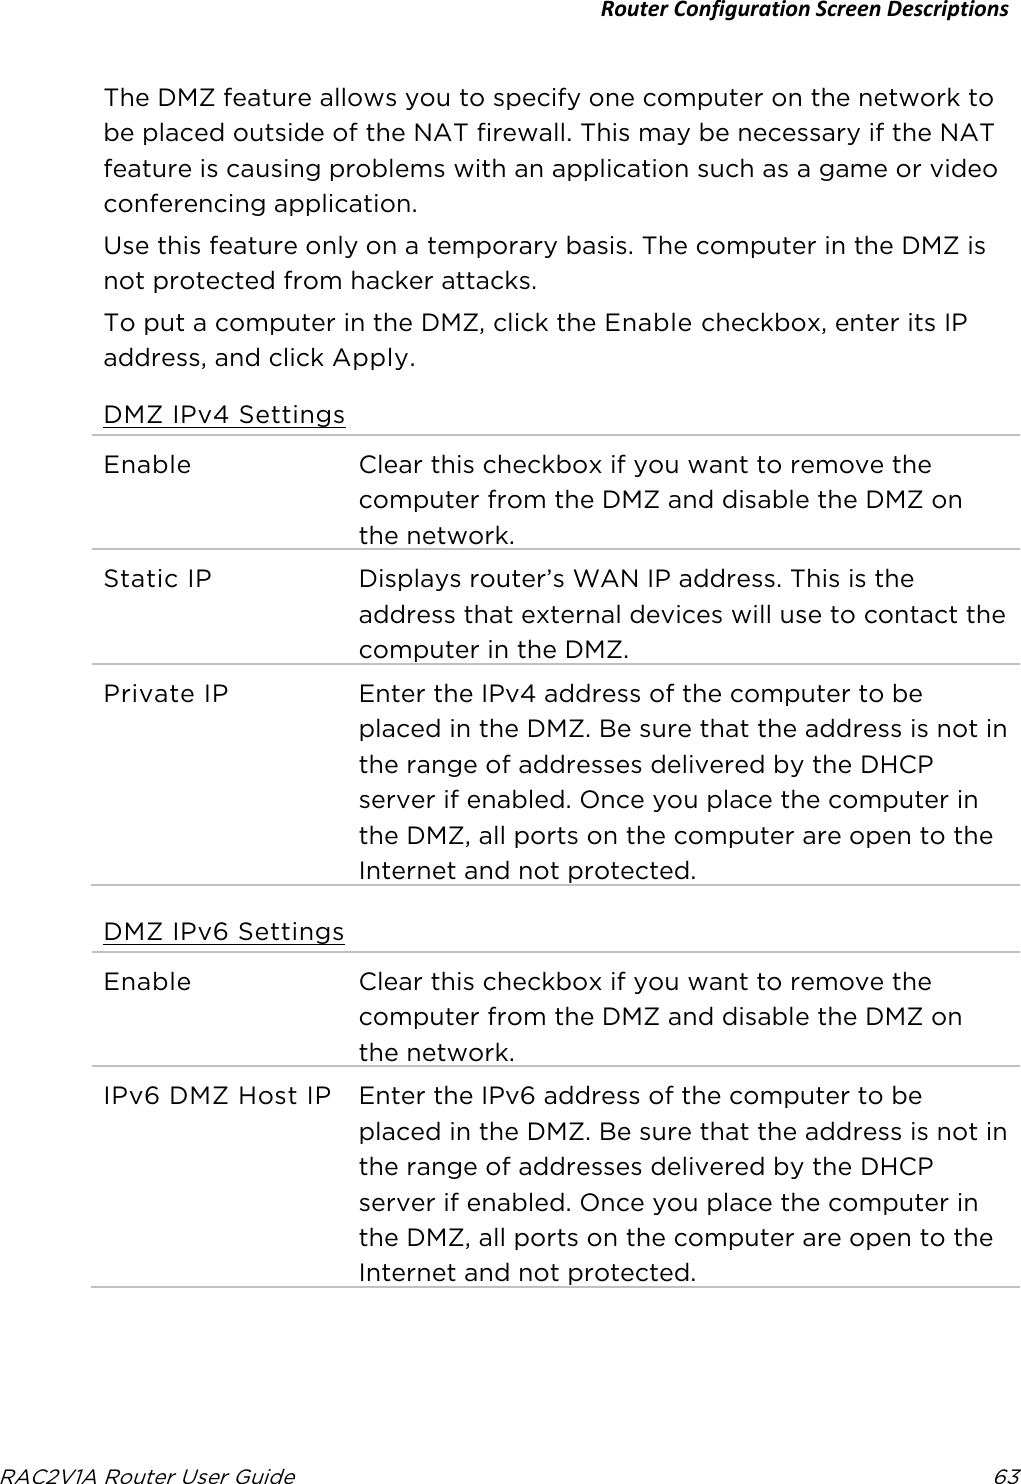 Router Configuration Screen Descriptions  RAC2V1A Router User Guide 63  The DMZ feature allows you to specify one computer on the network to be placed outside of the NAT firewall. This may be necessary if the NAT feature is causing problems with an application such as a game or video conferencing application. Use this feature only on a temporary basis. The computer in the DMZ is not protected from hacker attacks. To put a computer in the DMZ, click the Enable checkbox, enter its IP address, and click Apply. DMZ IPv4 Settings Enable  Clear this checkbox if you want to remove the computer from the DMZ and disable the DMZ on the network. Static IP Displays router’s WAN IP address. This is the address that external devices will use to contact the computer in the DMZ. Private IP Enter the IPv4 address of the computer to be placed in the DMZ. Be sure that the address is not in the range of addresses delivered by the DHCP server if enabled. Once you place the computer in the DMZ, all ports on the computer are open to the Internet and not protected.   DMZ IPv6 Settings Enable  Clear this checkbox if you want to remove the computer from the DMZ and disable the DMZ on the network. IPv6 DMZ Host IP Enter the IPv6 address of the computer to be placed in the DMZ. Be sure that the address is not in the range of addresses delivered by the DHCP server if enabled. Once you place the computer in the DMZ, all ports on the computer are open to the Internet and not protected. 